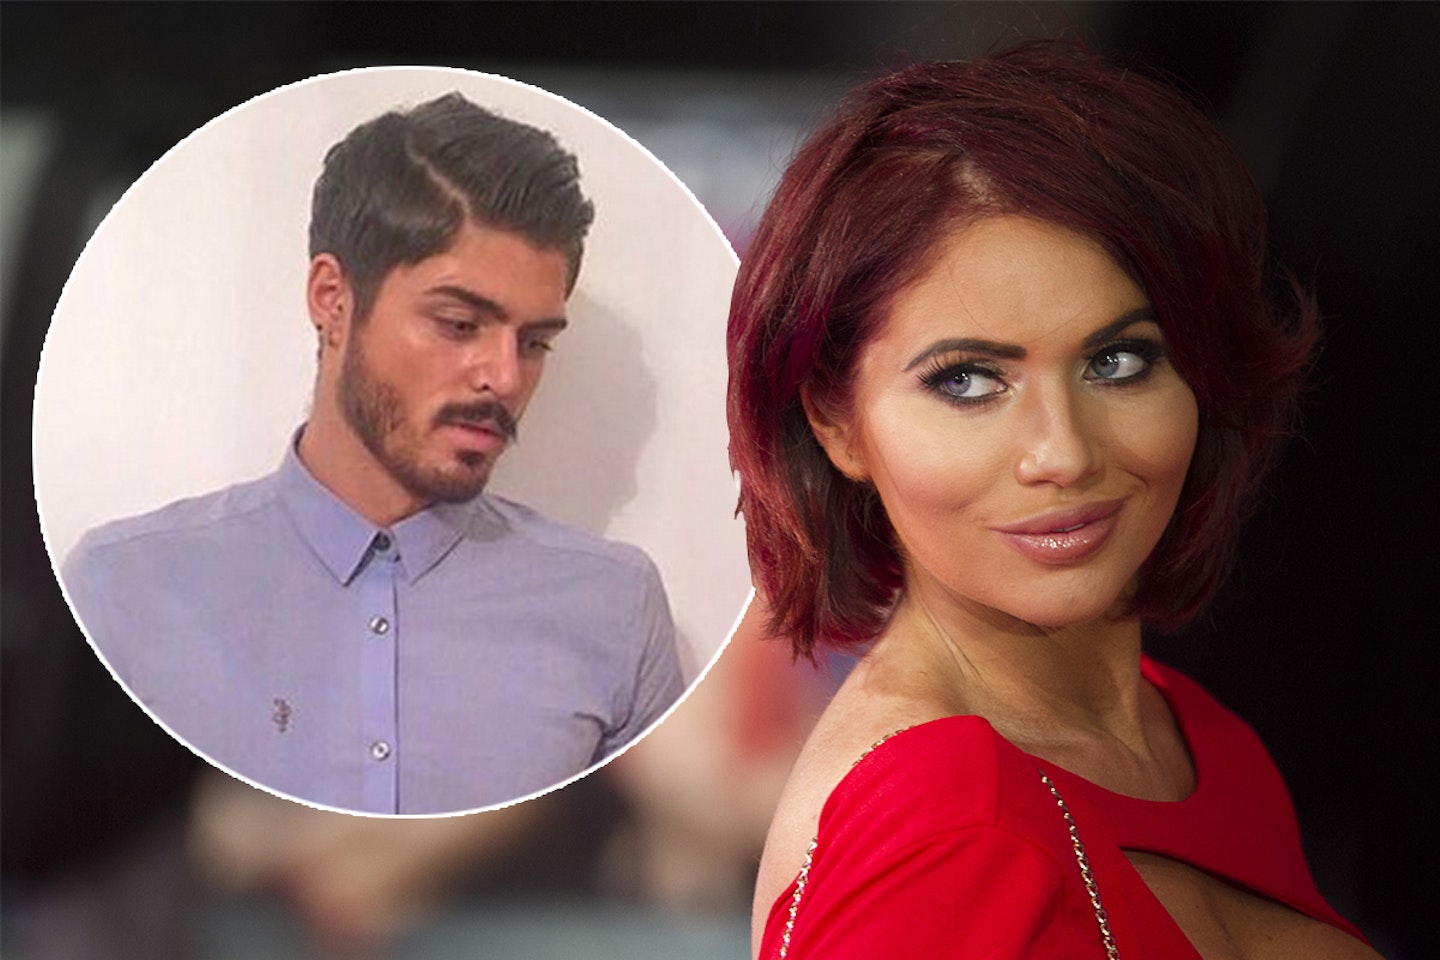 Sam Reece and Amy Childs